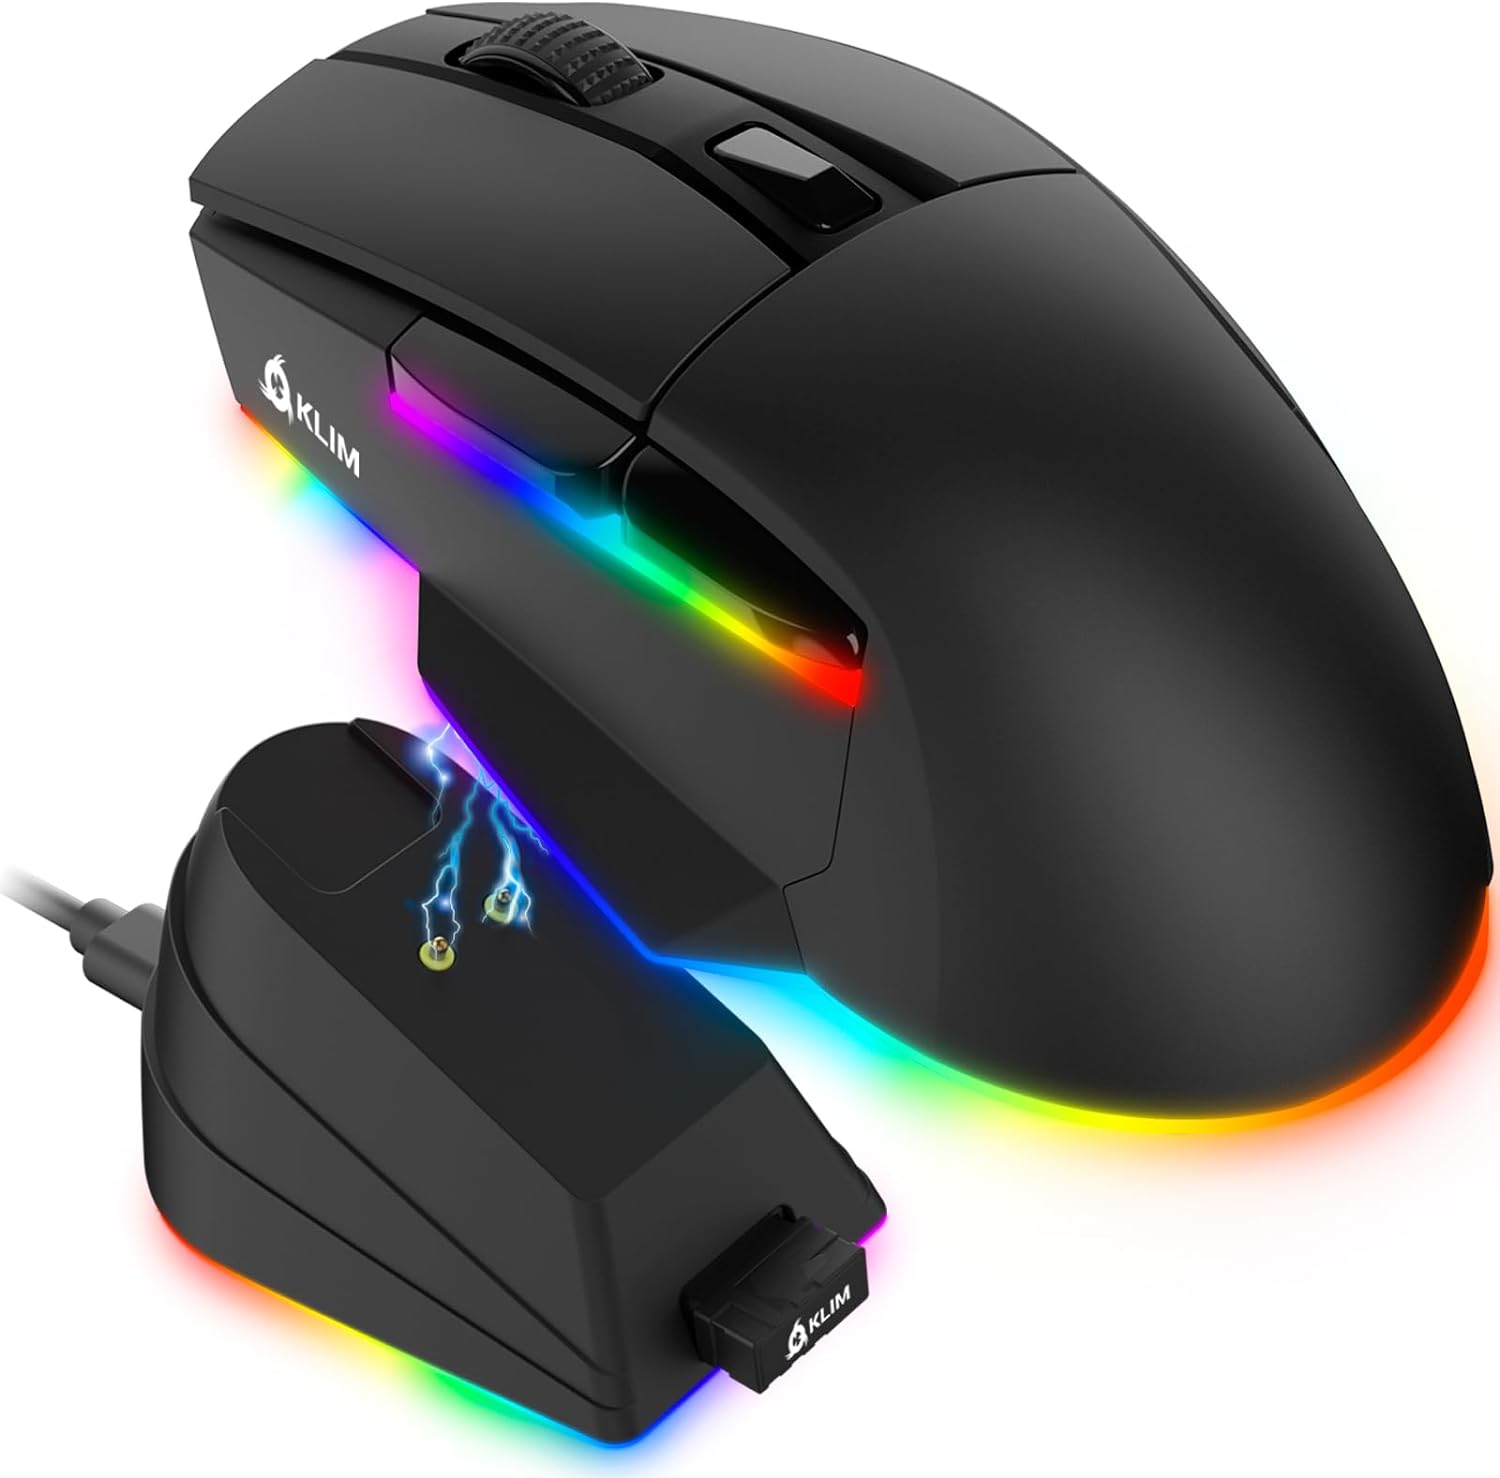 Best Mouse Pad with RGB Lighting: Illuminate Your Gaming Setup